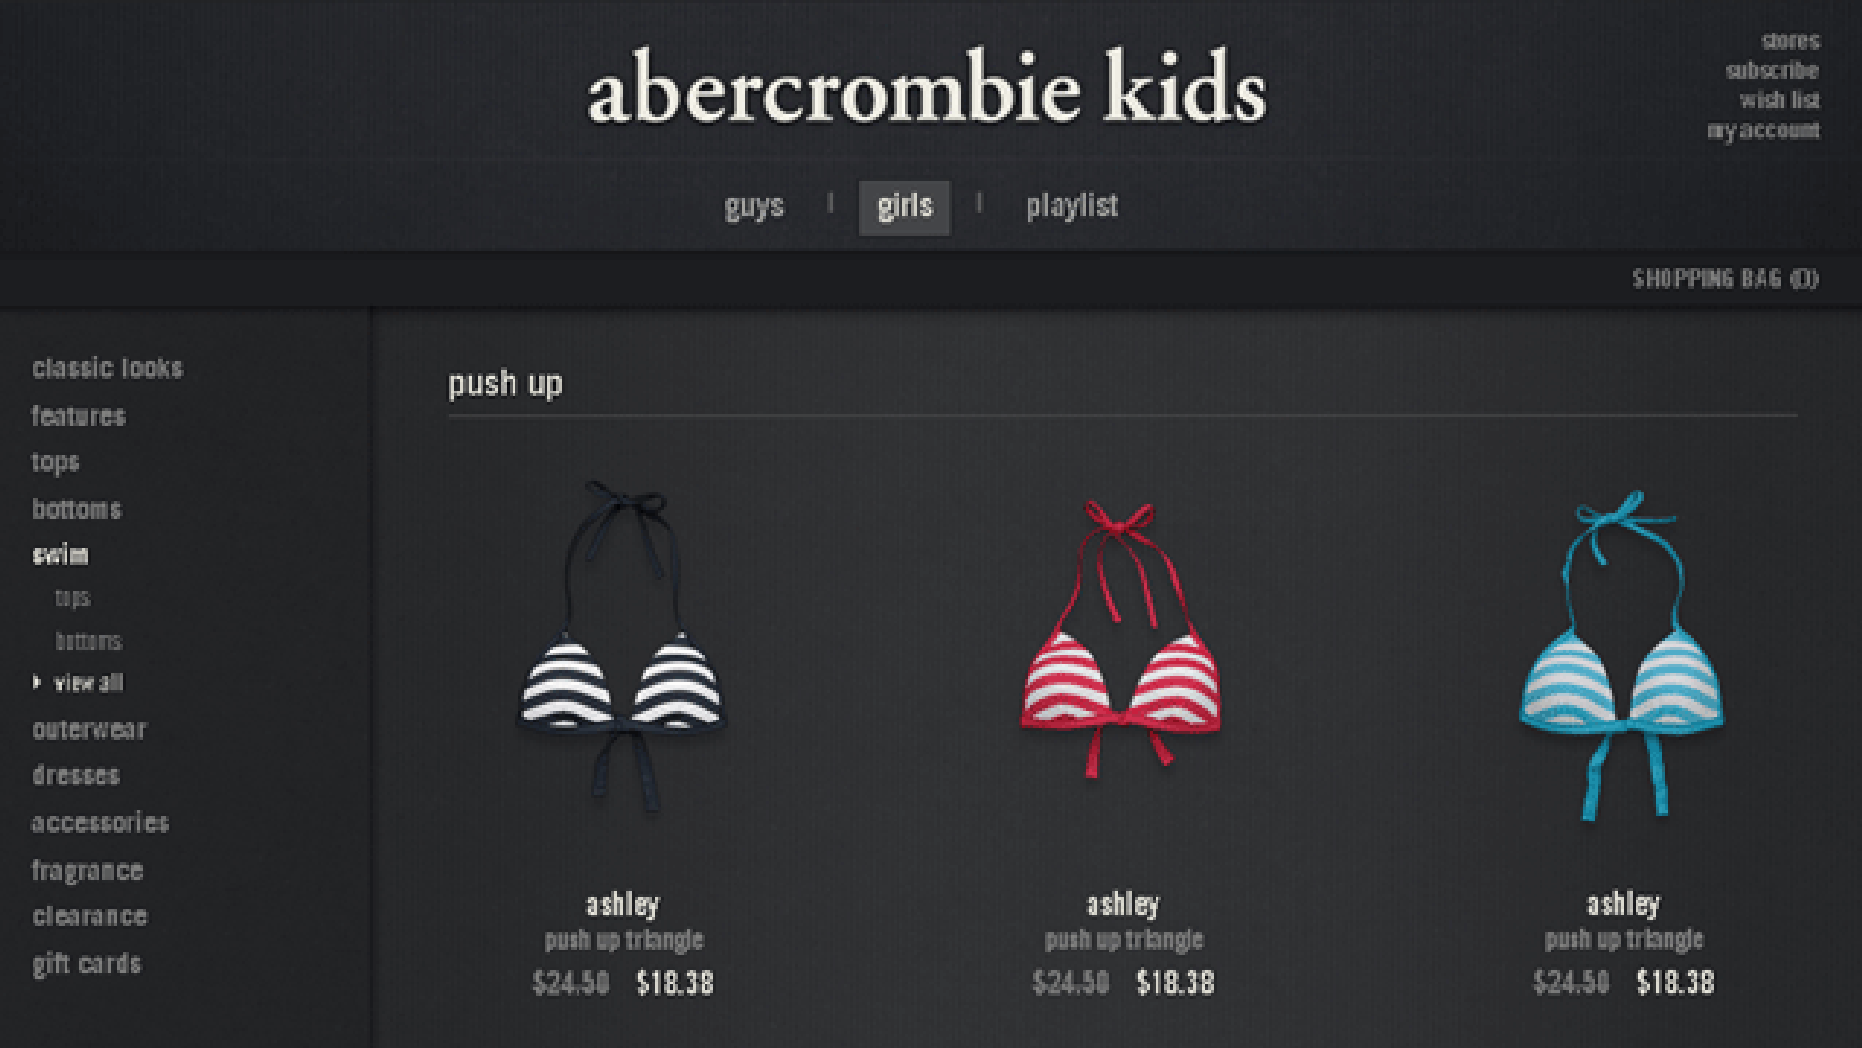 abercrombie for toddlers